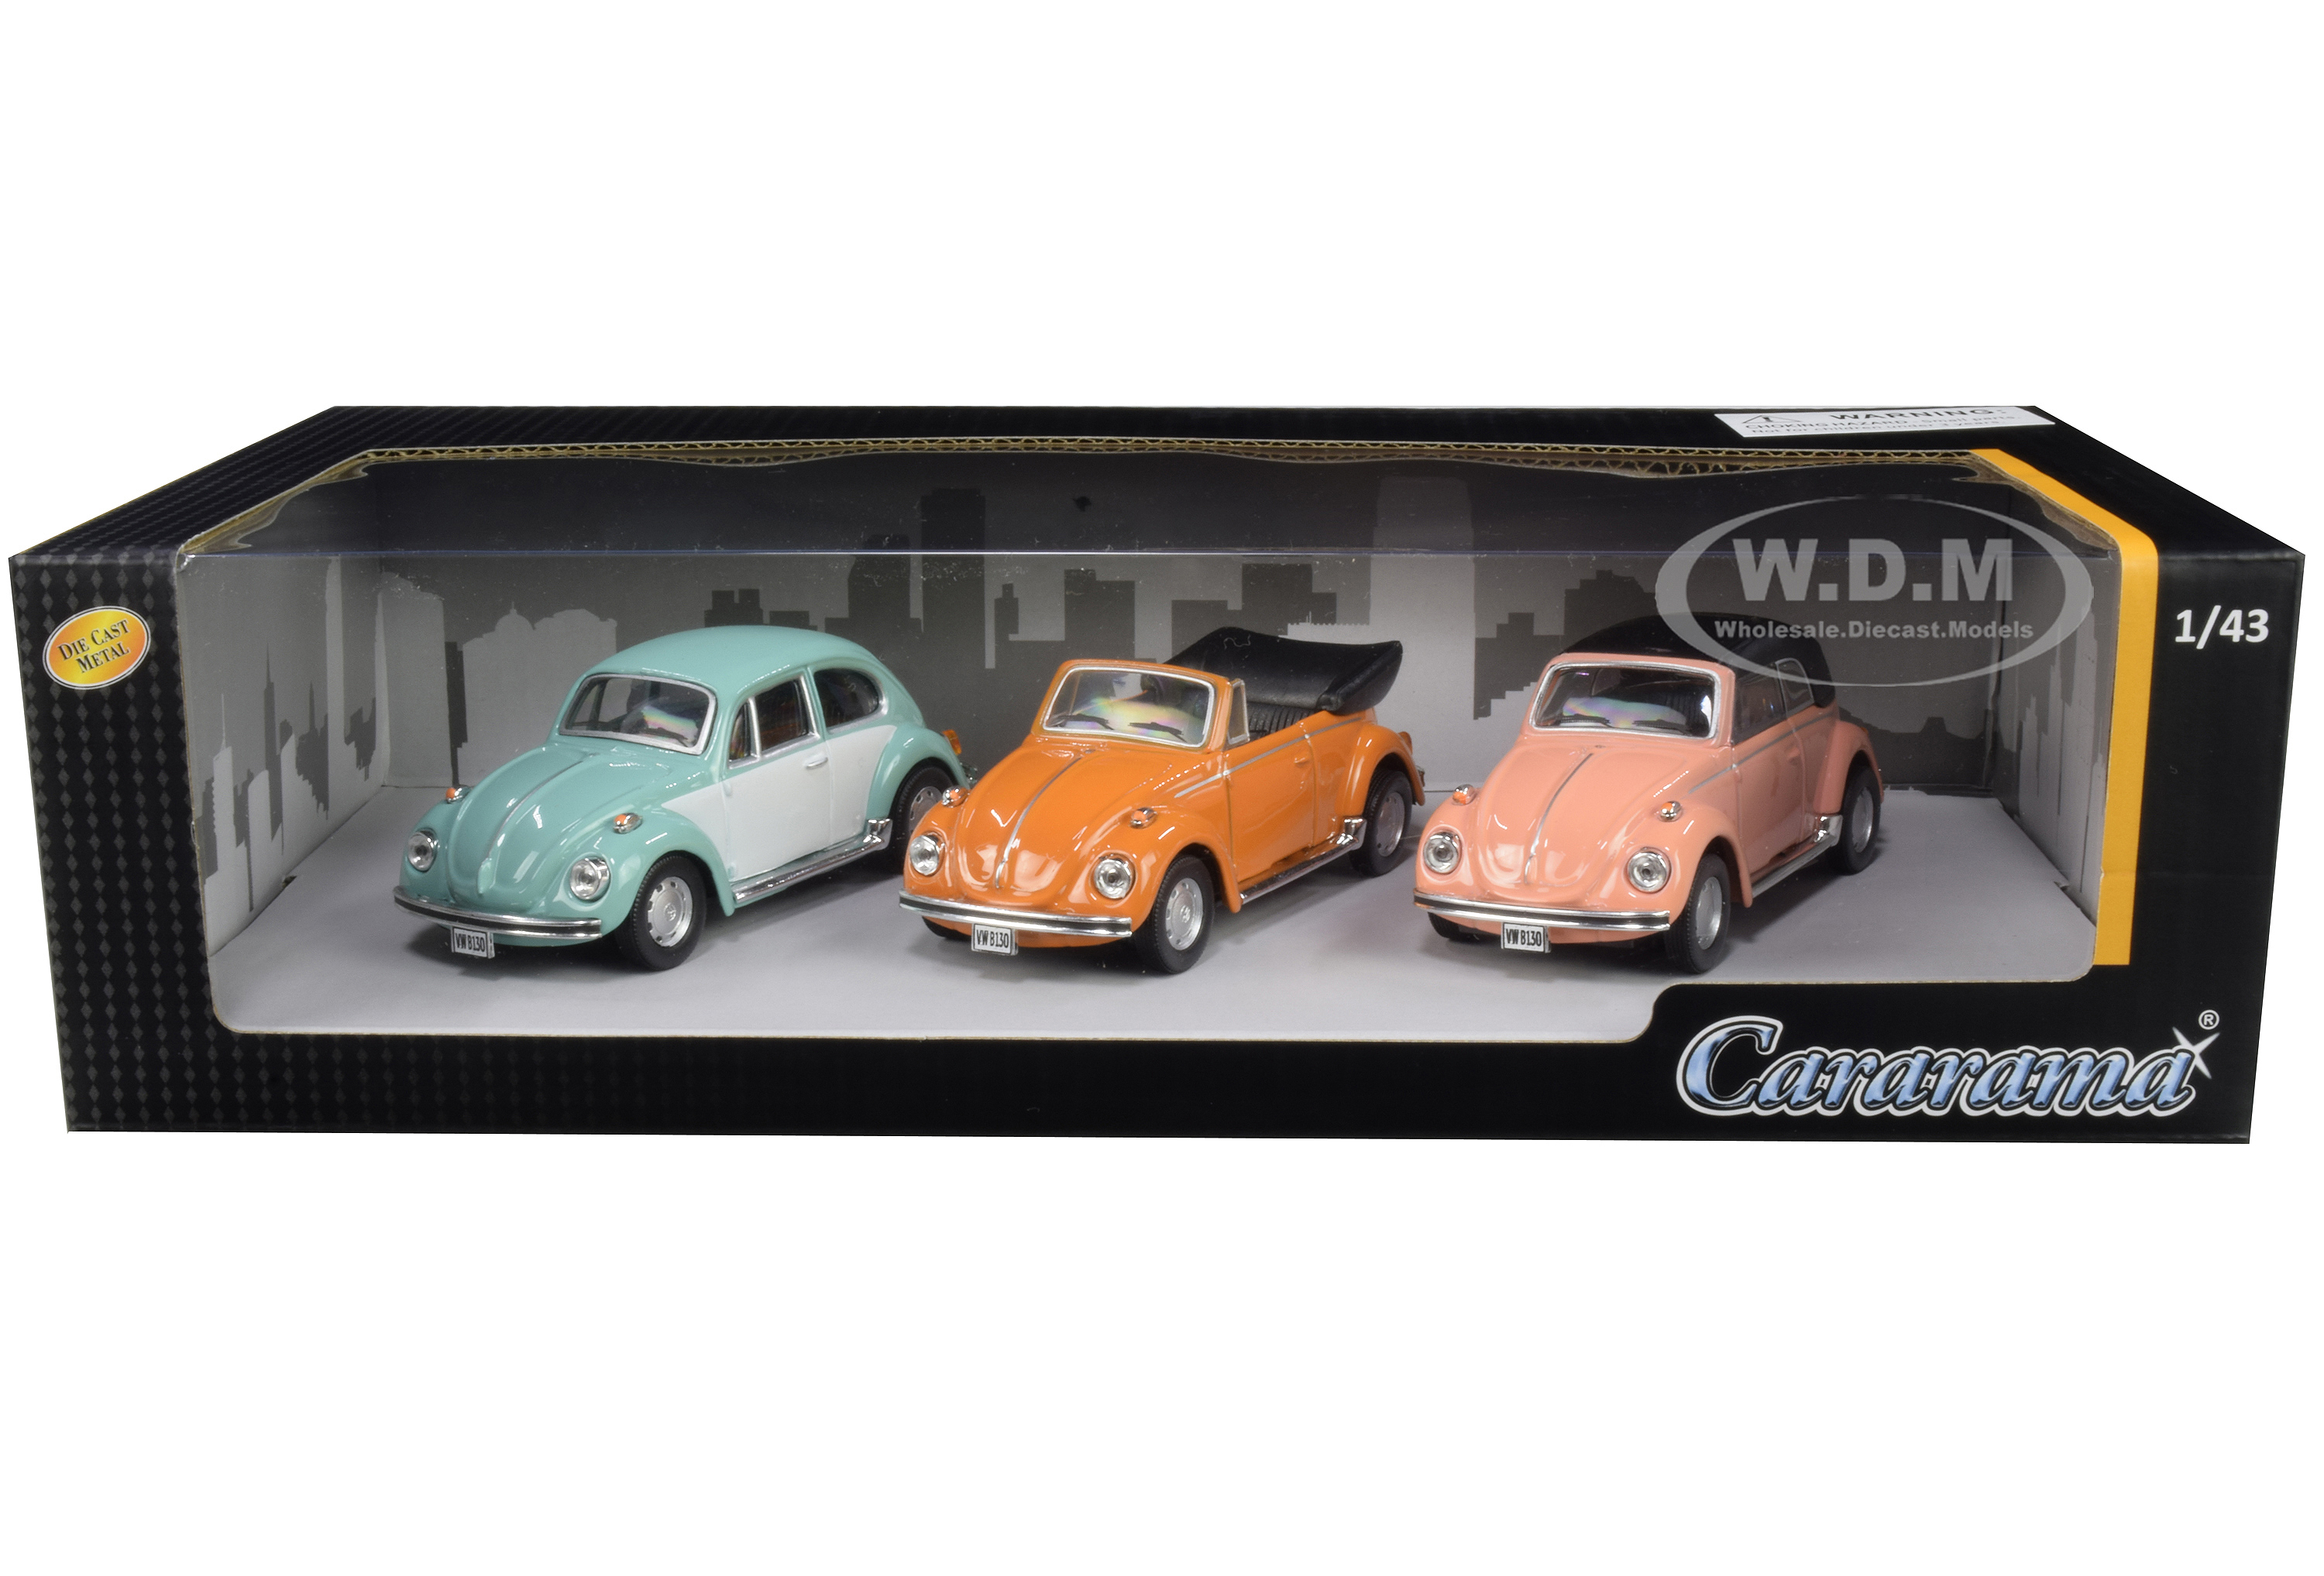 Volkswagen Beetle 3 piece Gift Set 1/43 Diecast Model Cars by Cararama